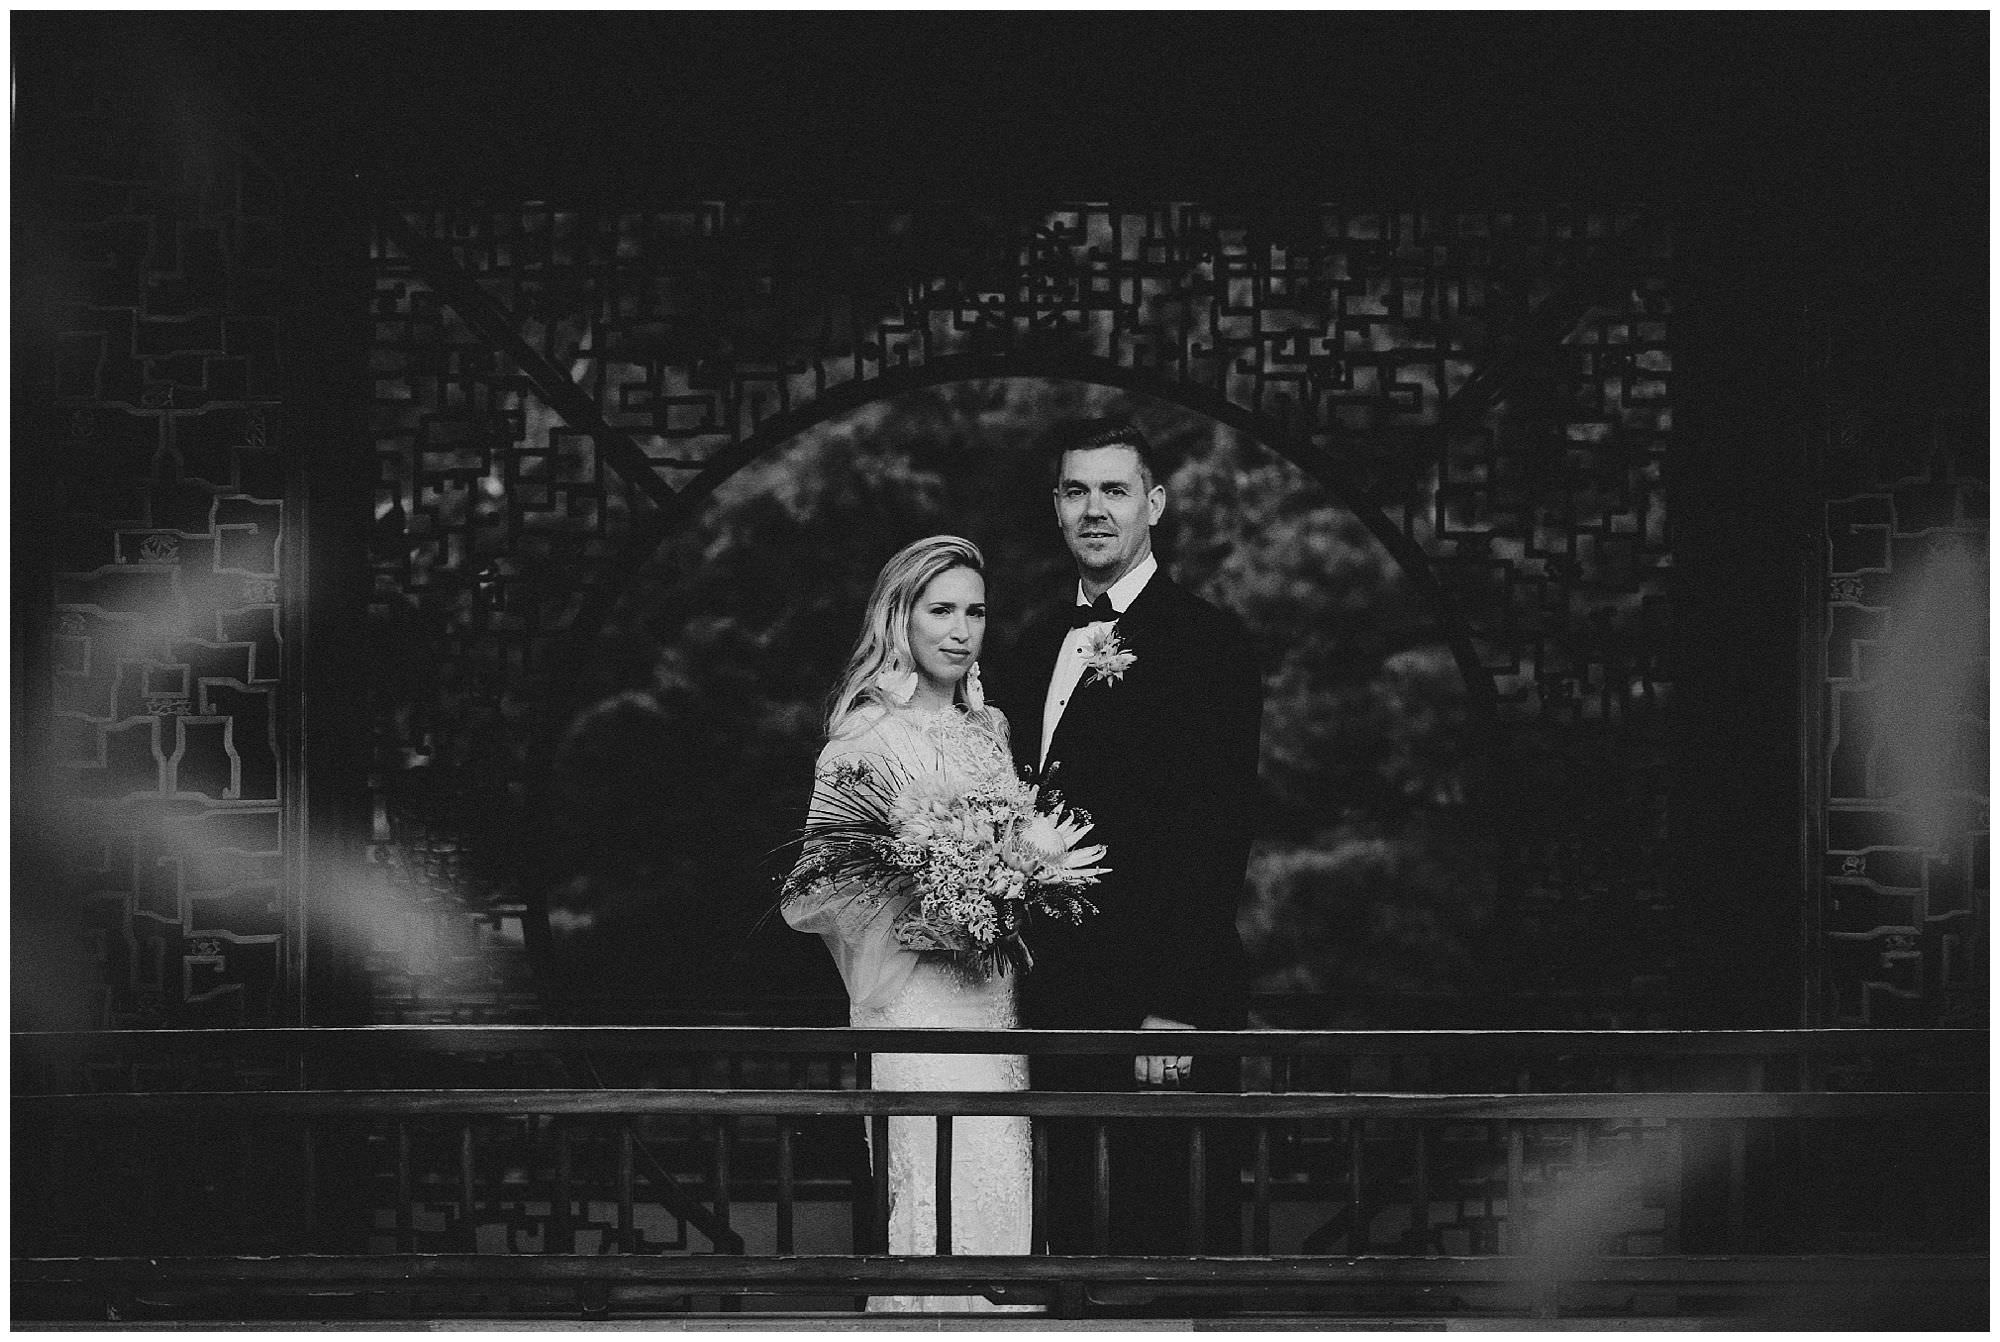 Bride and Groom at sunset after their wedding ceremony at Dr. Sun Yat-Sen Classical Chinese Gardens, elopement, intimate wedding, black and white wedding photography